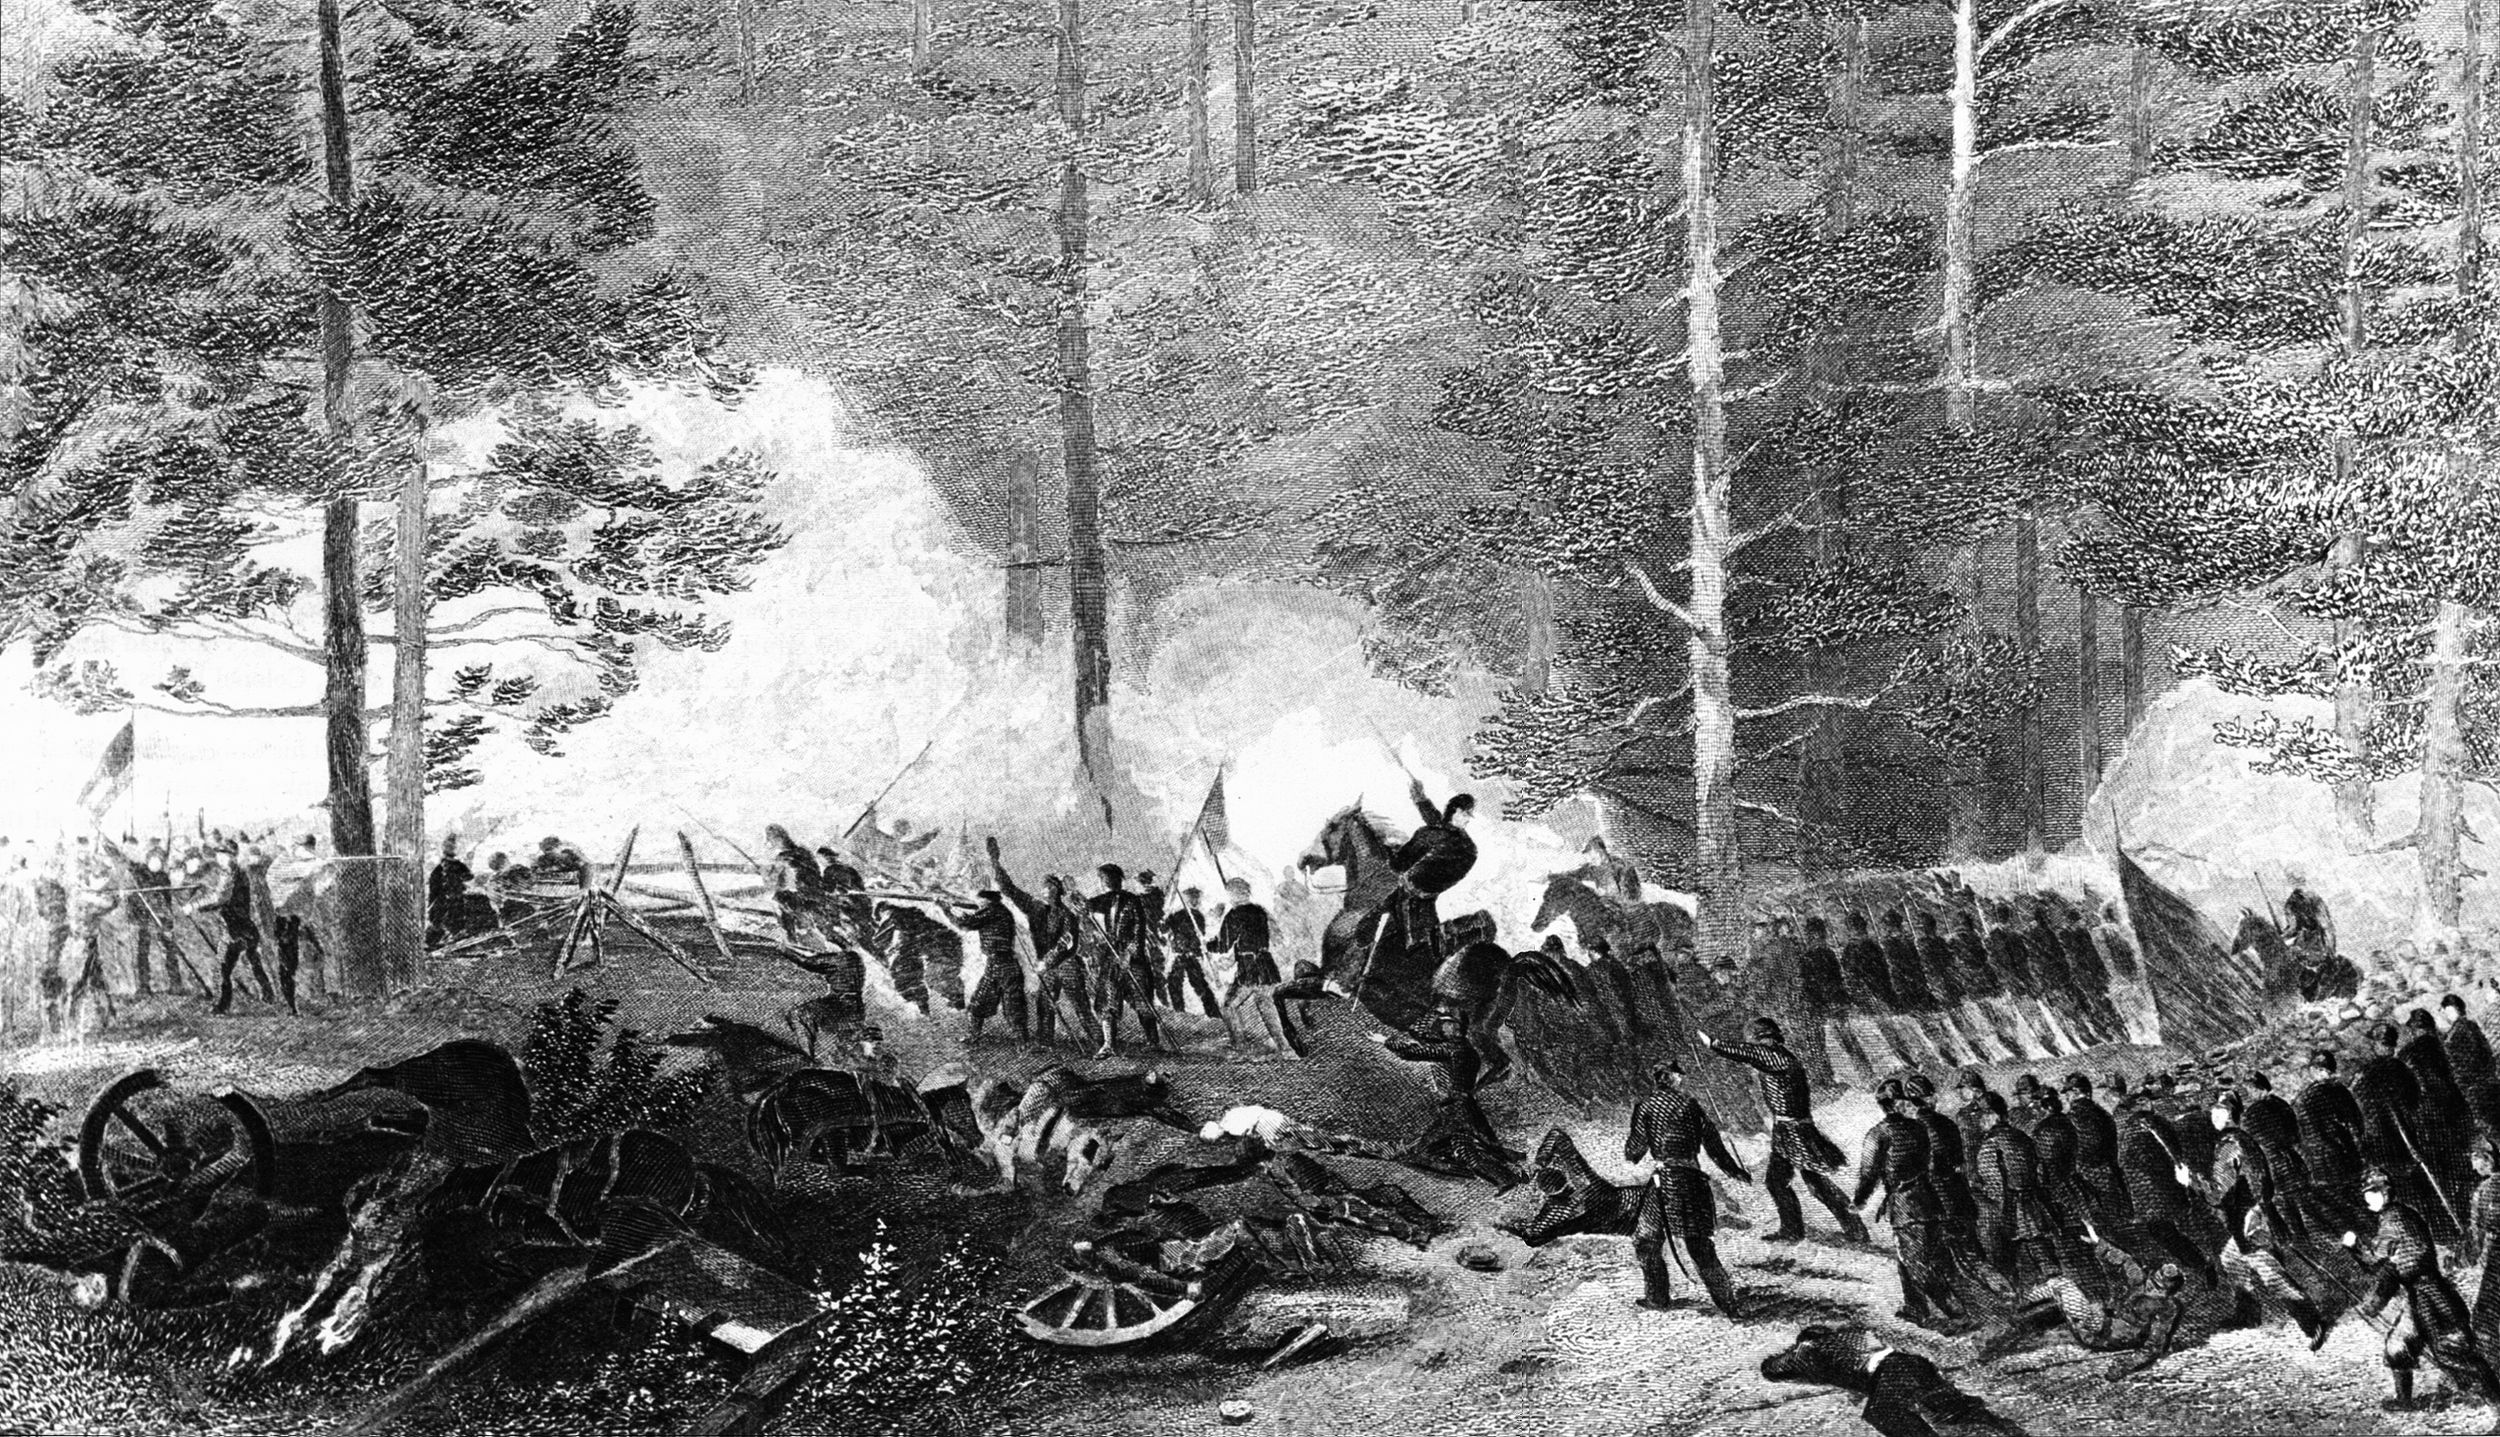 Brigadier General Samuel Crawford leads his Federal troops into the Confederate left flank, routing two regiments from the vaunted Stonewall Brigade. 